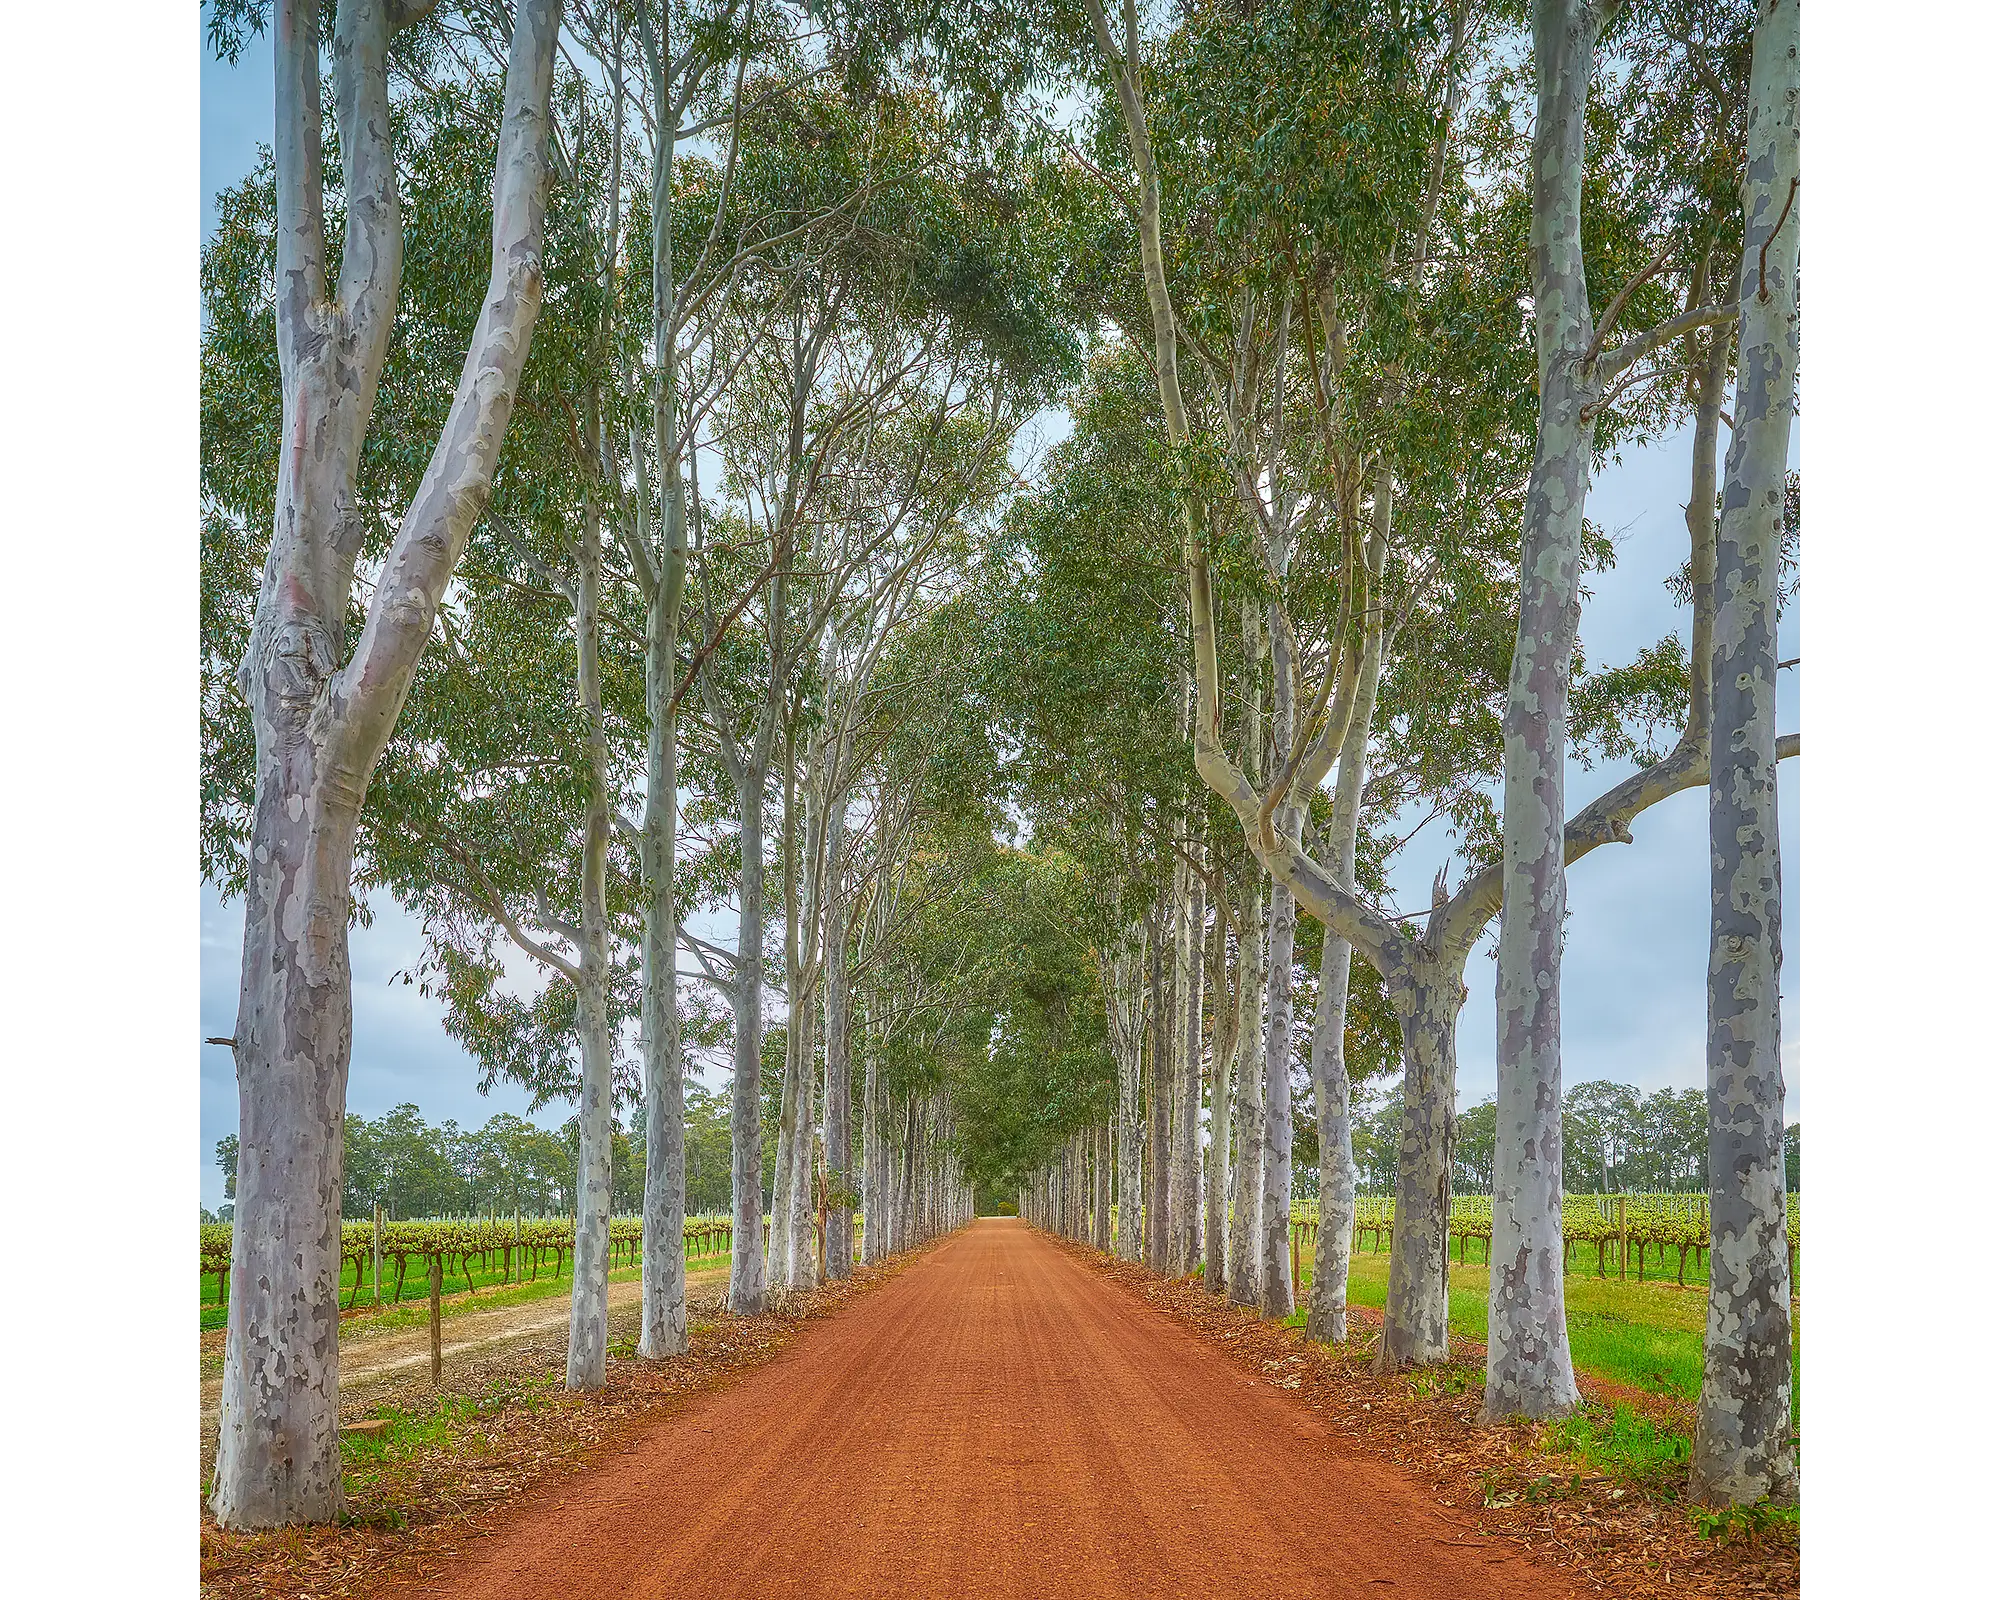 The Entrance - Driveway to providore, Margaret River.